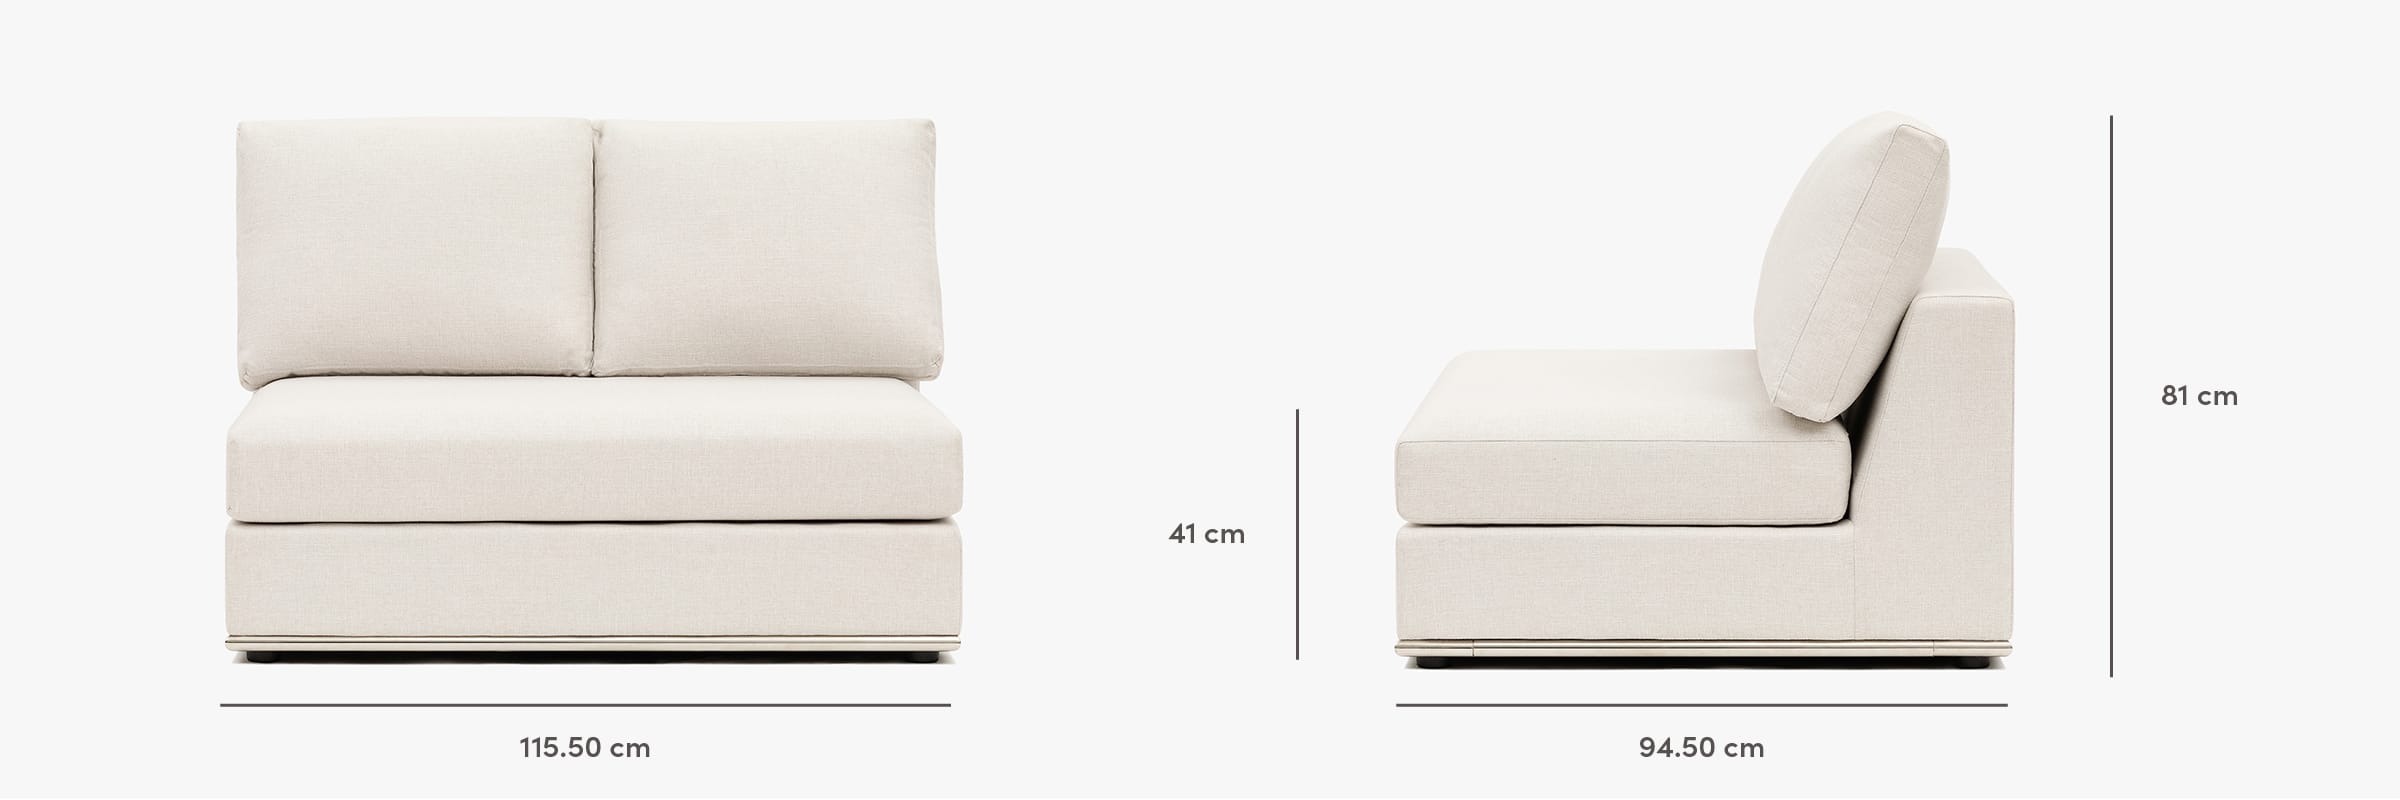 The Flow Armless Chair - dimensions